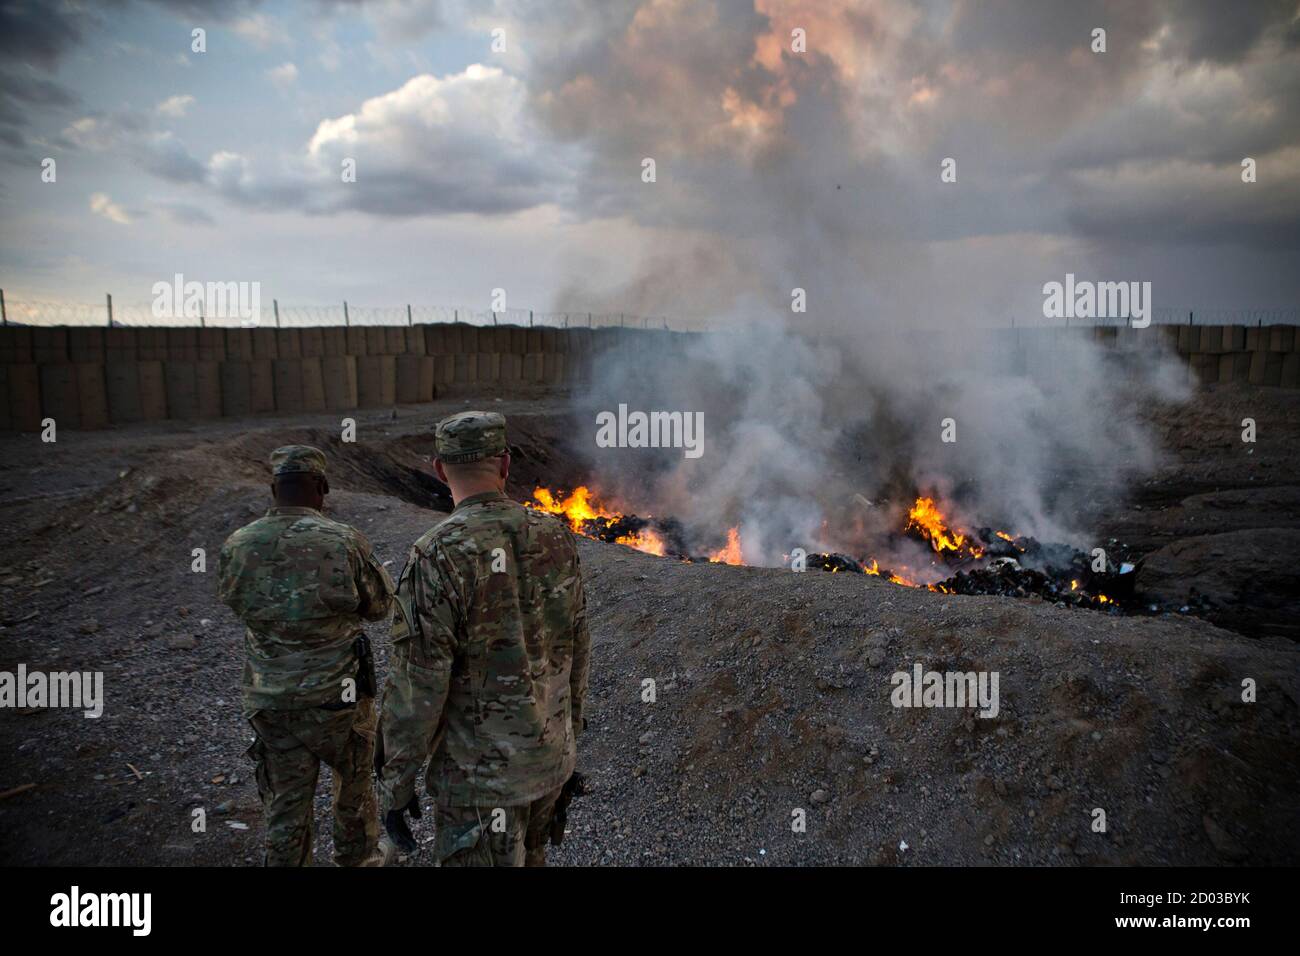 U.S. Army soldiers watch garbage burn in a burn-pit at Forward Operating Base Azzizulah in Maiwand District, Kandahar Province, Afghanistan, February 4, 2013. REUTERS/Andrew Burton (AFGHANISTAN - Tags: MILITARY) Stock Photo